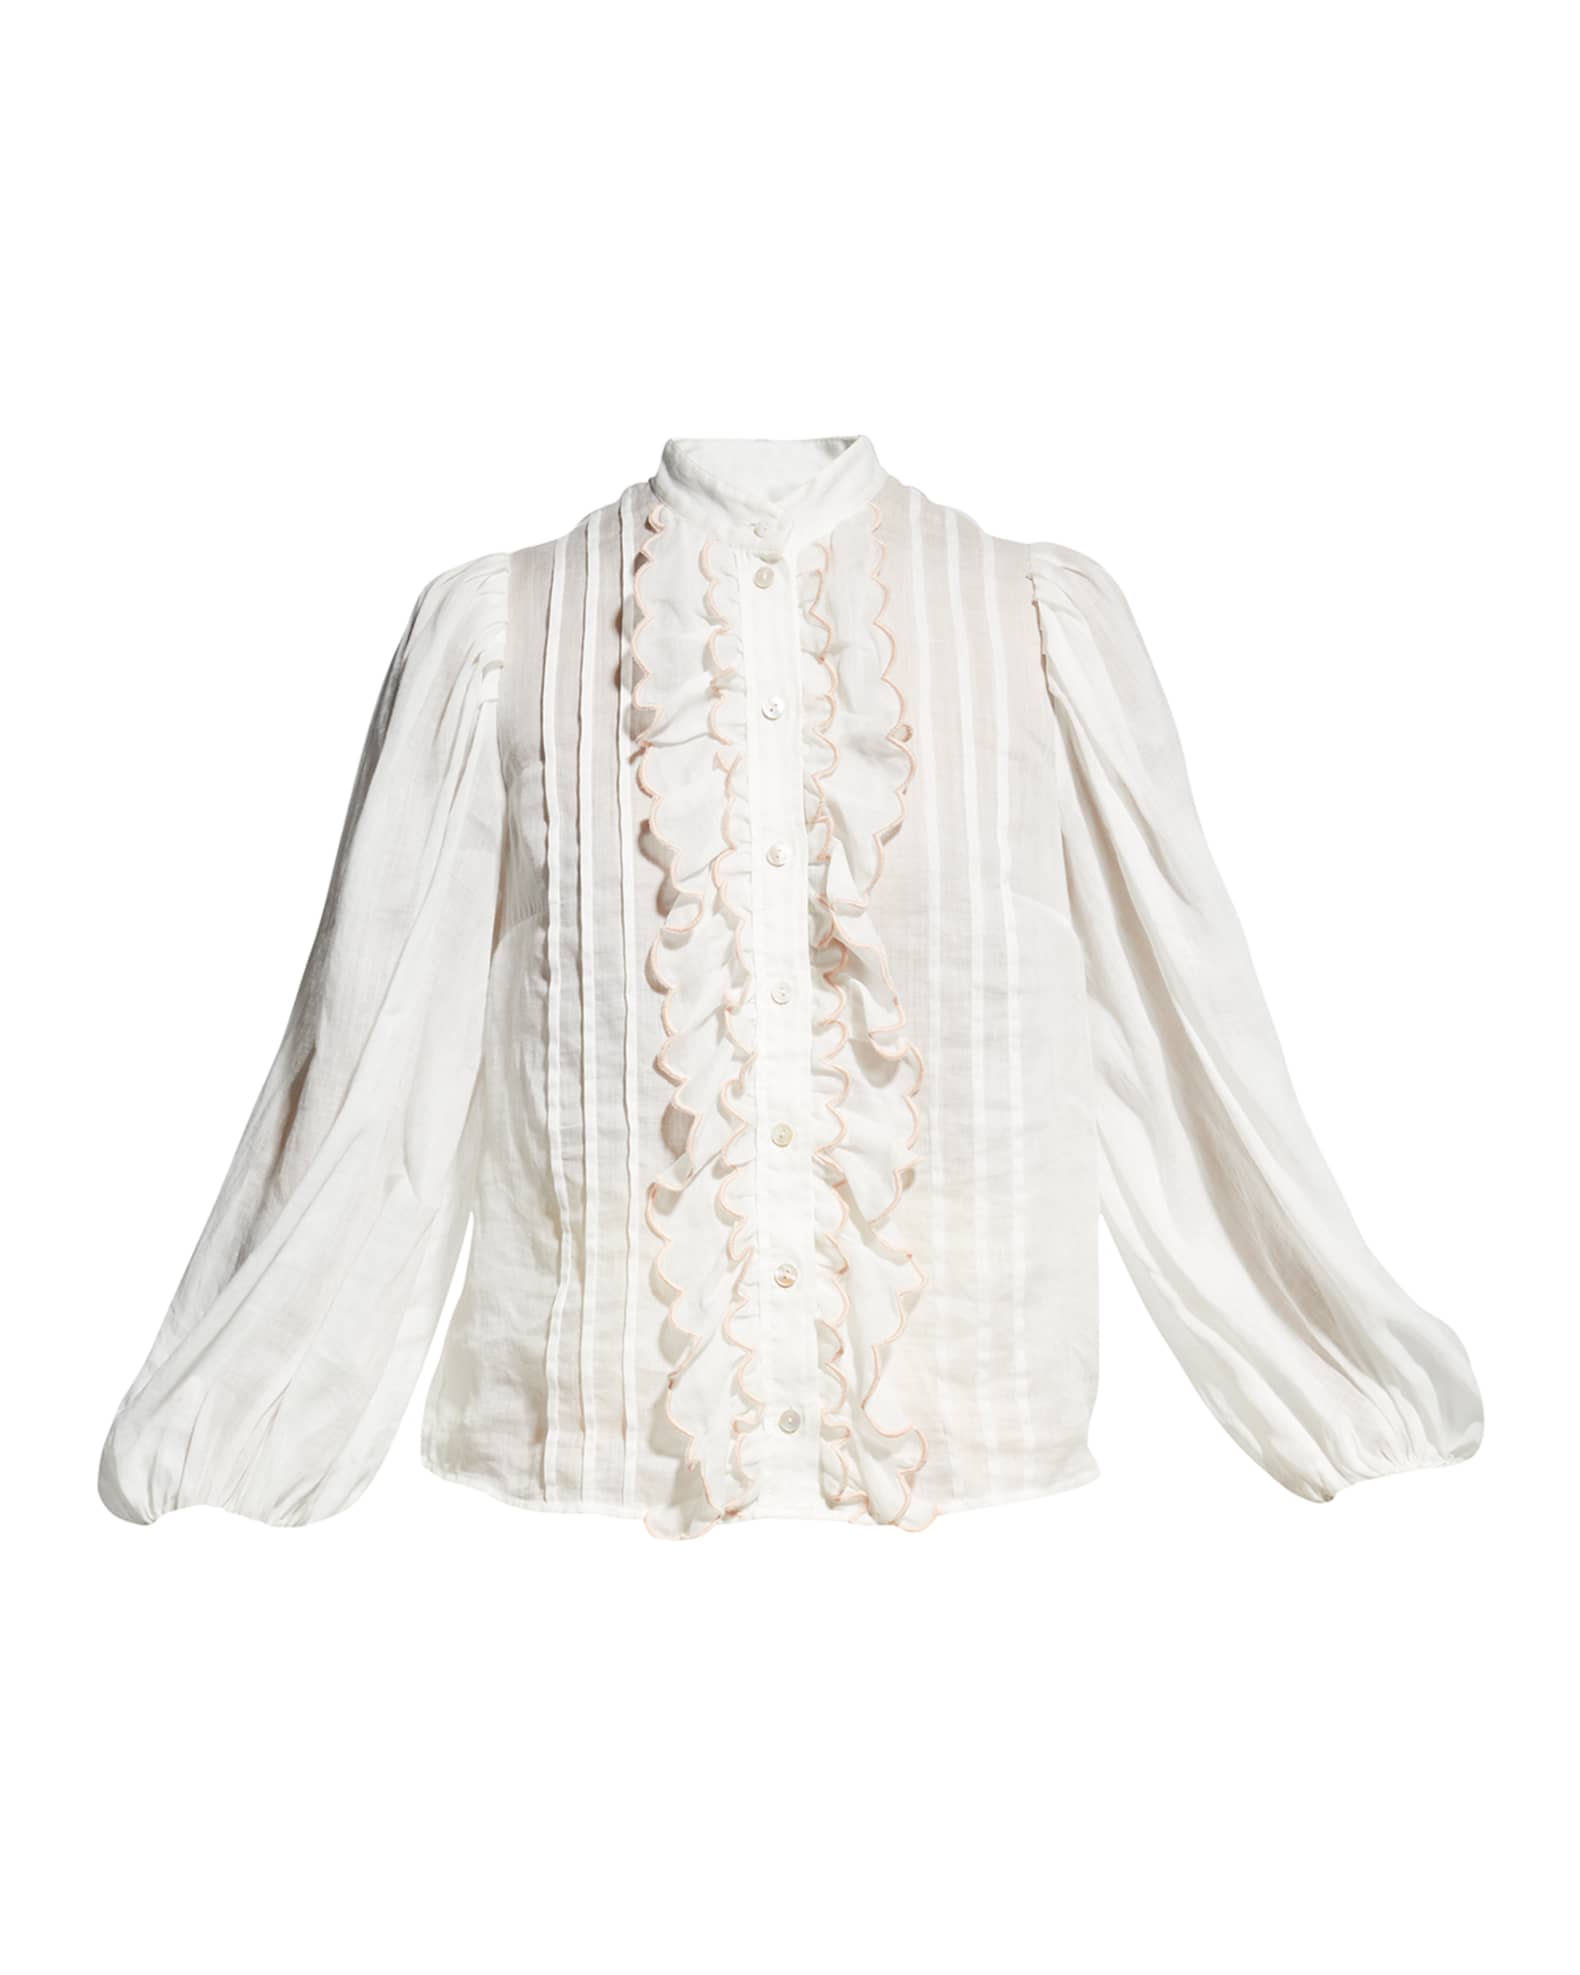 Zimmermann Jeannie Floral Button-Front Embroidered Yoke Blouse | Neiman ...